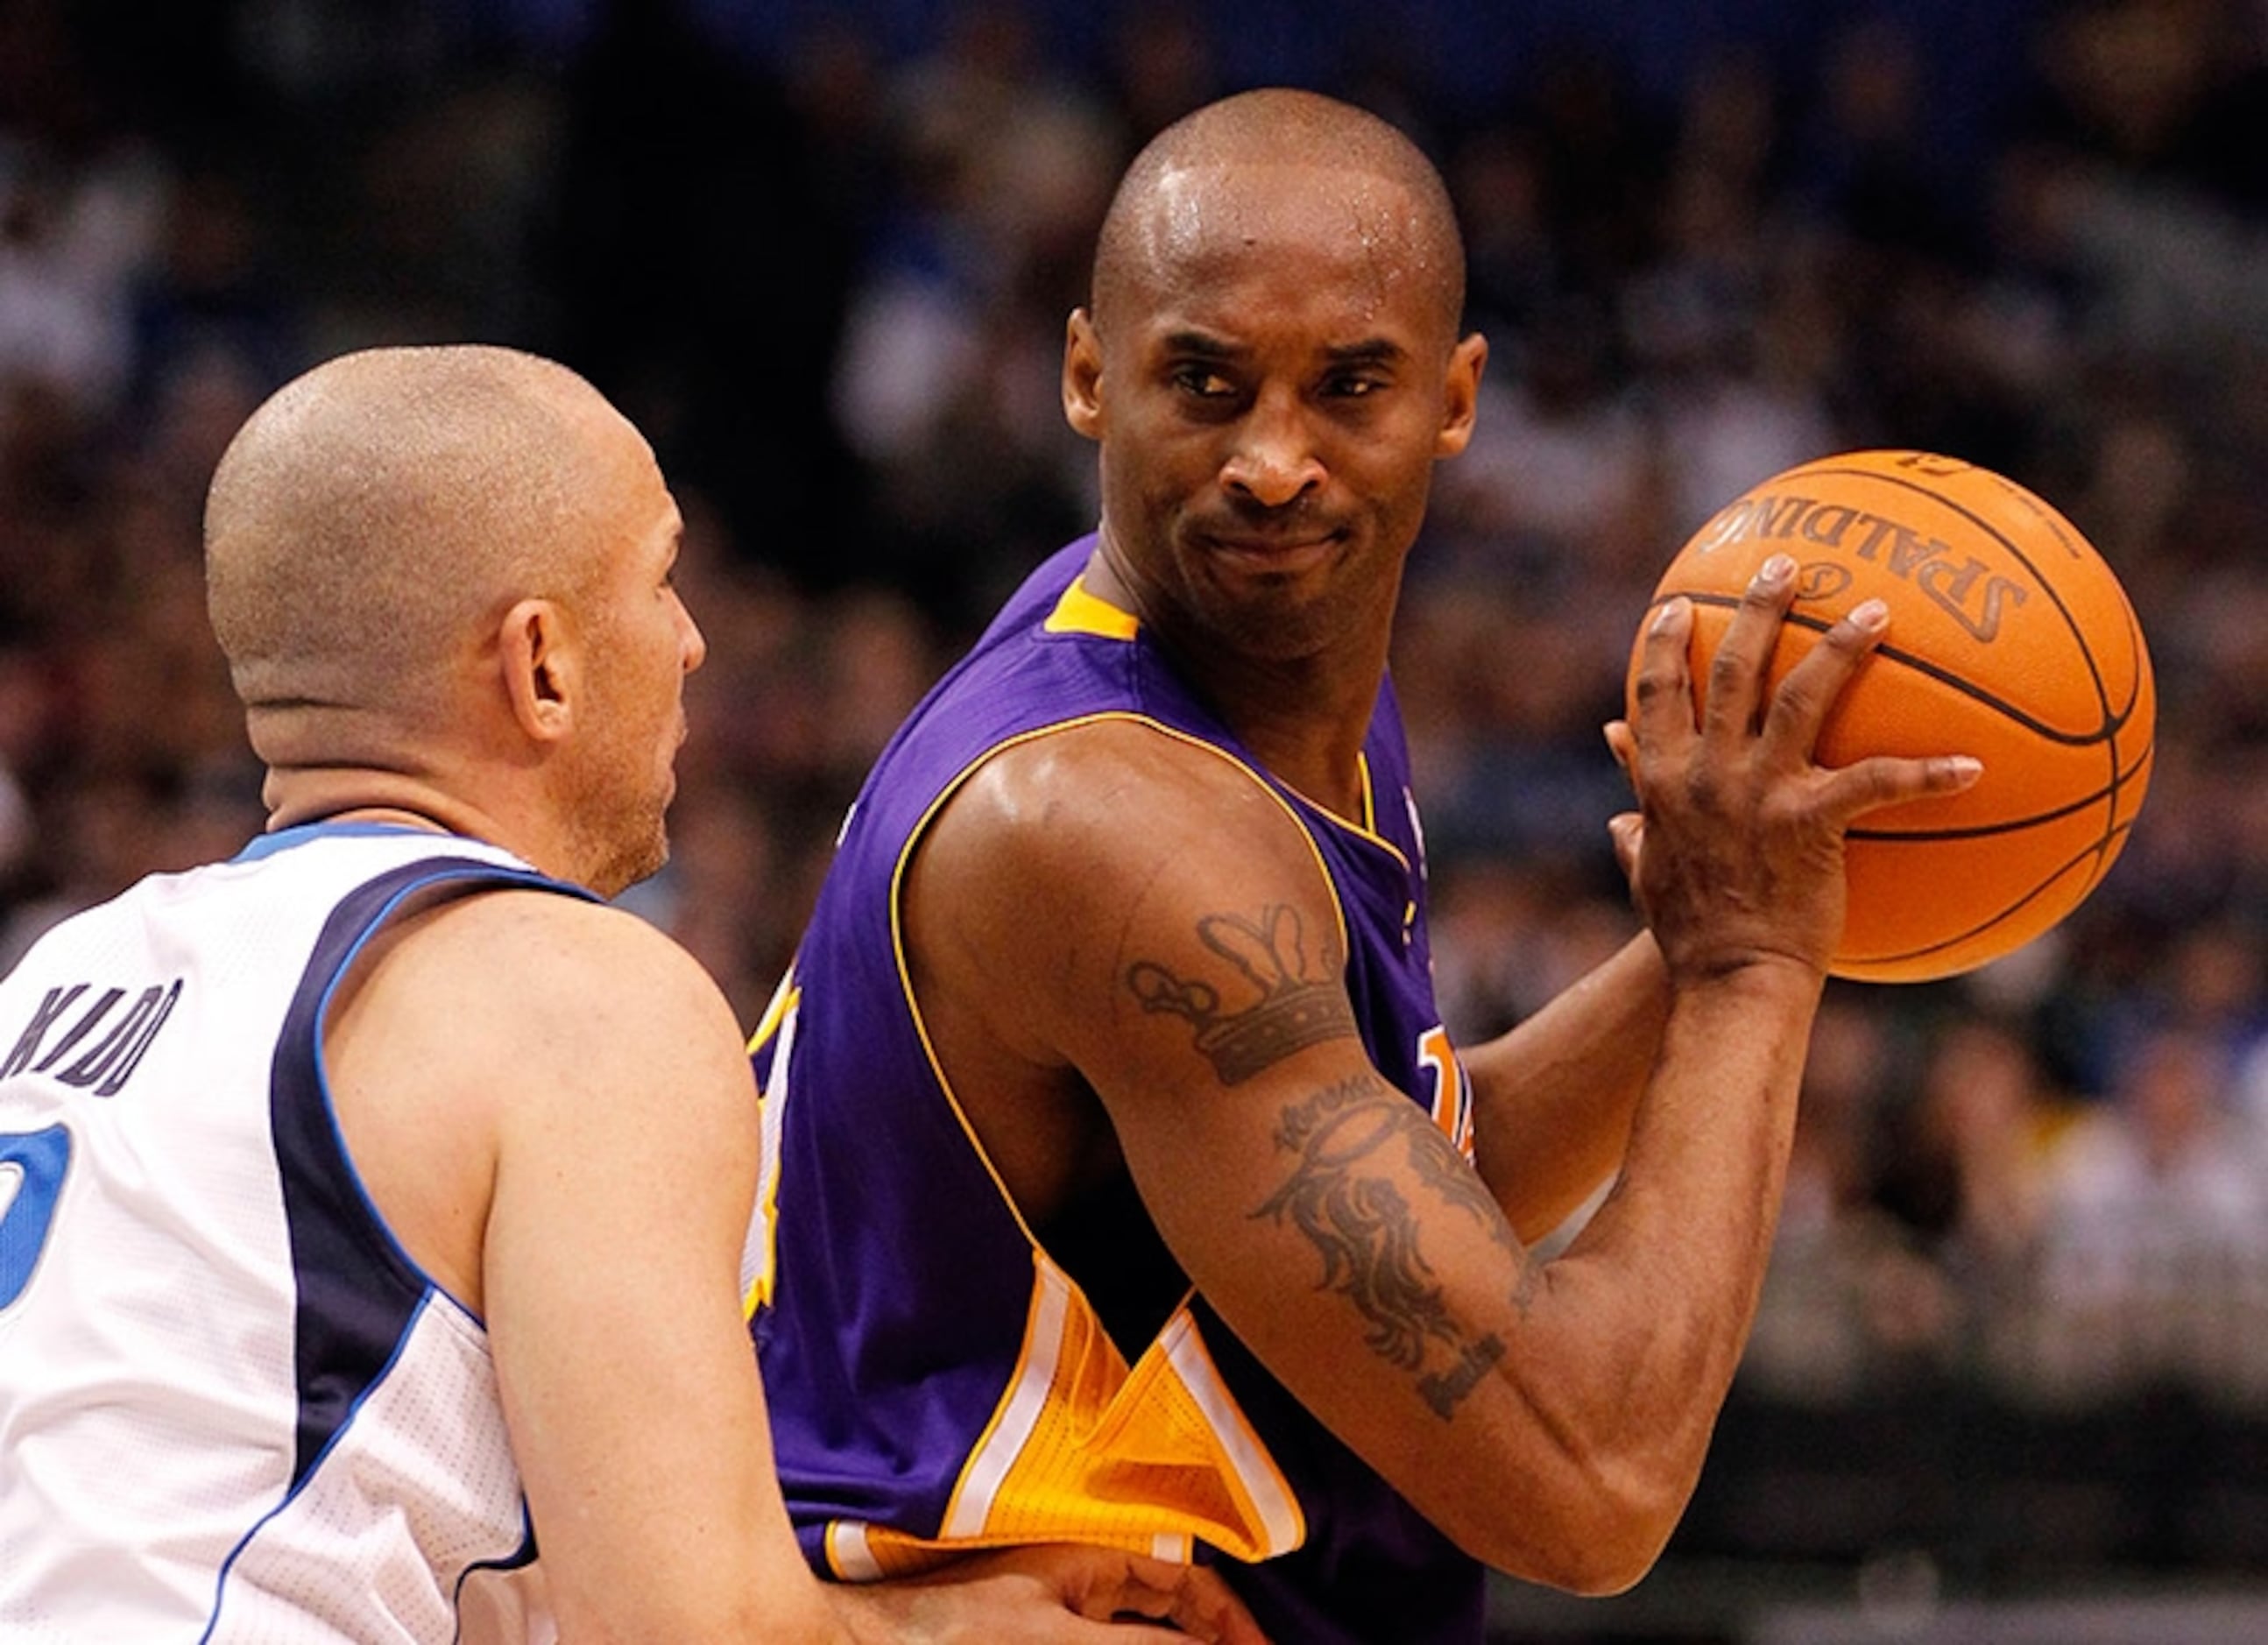 Lakers' Kobe Bryant to play on Christmas Day against Chicago